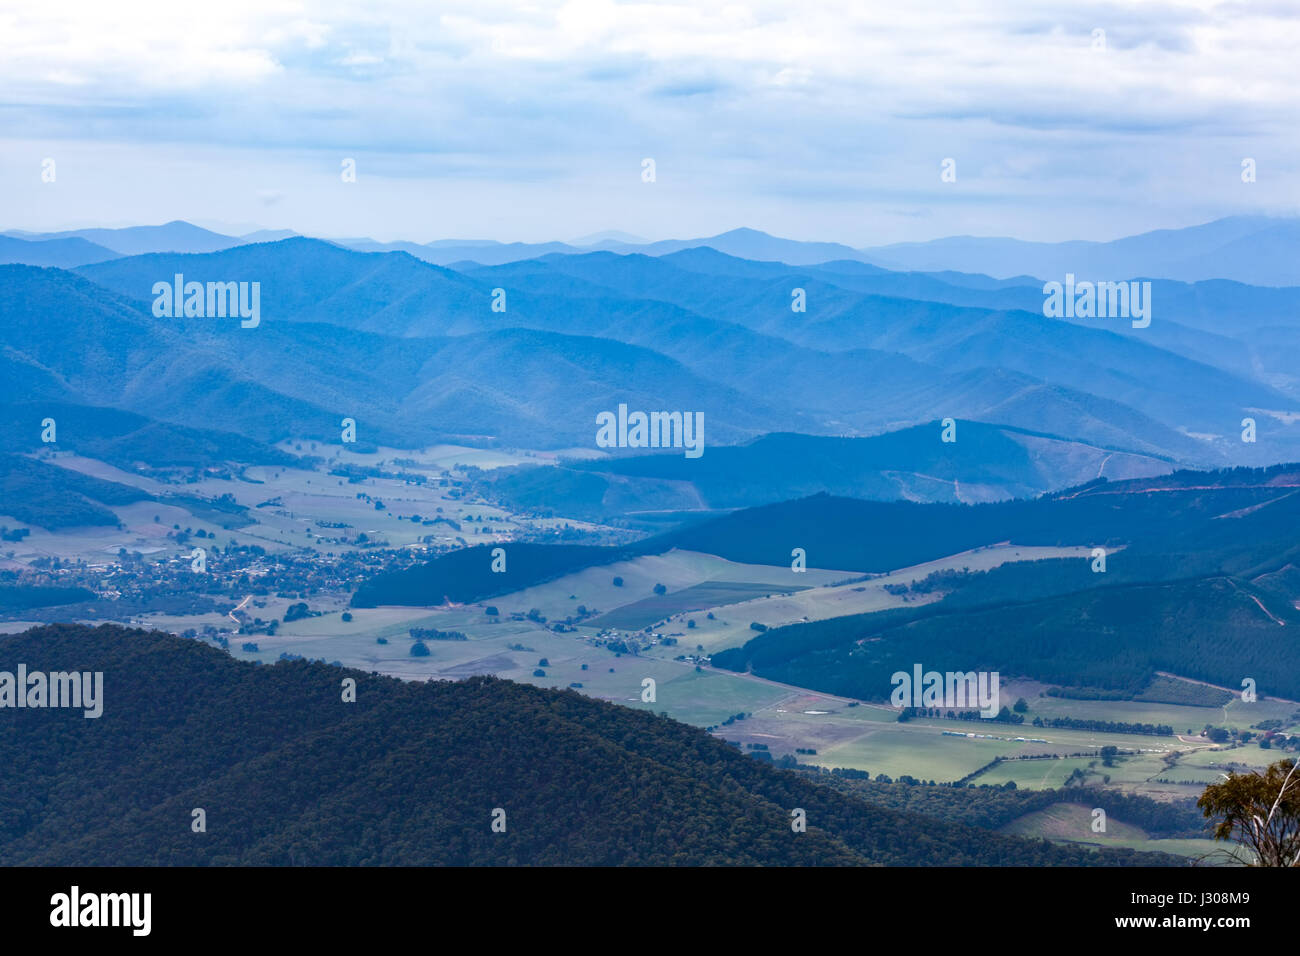 Mountains and countryside - beautiful landscape in muted colors. Victoria, Australia Stock Photo